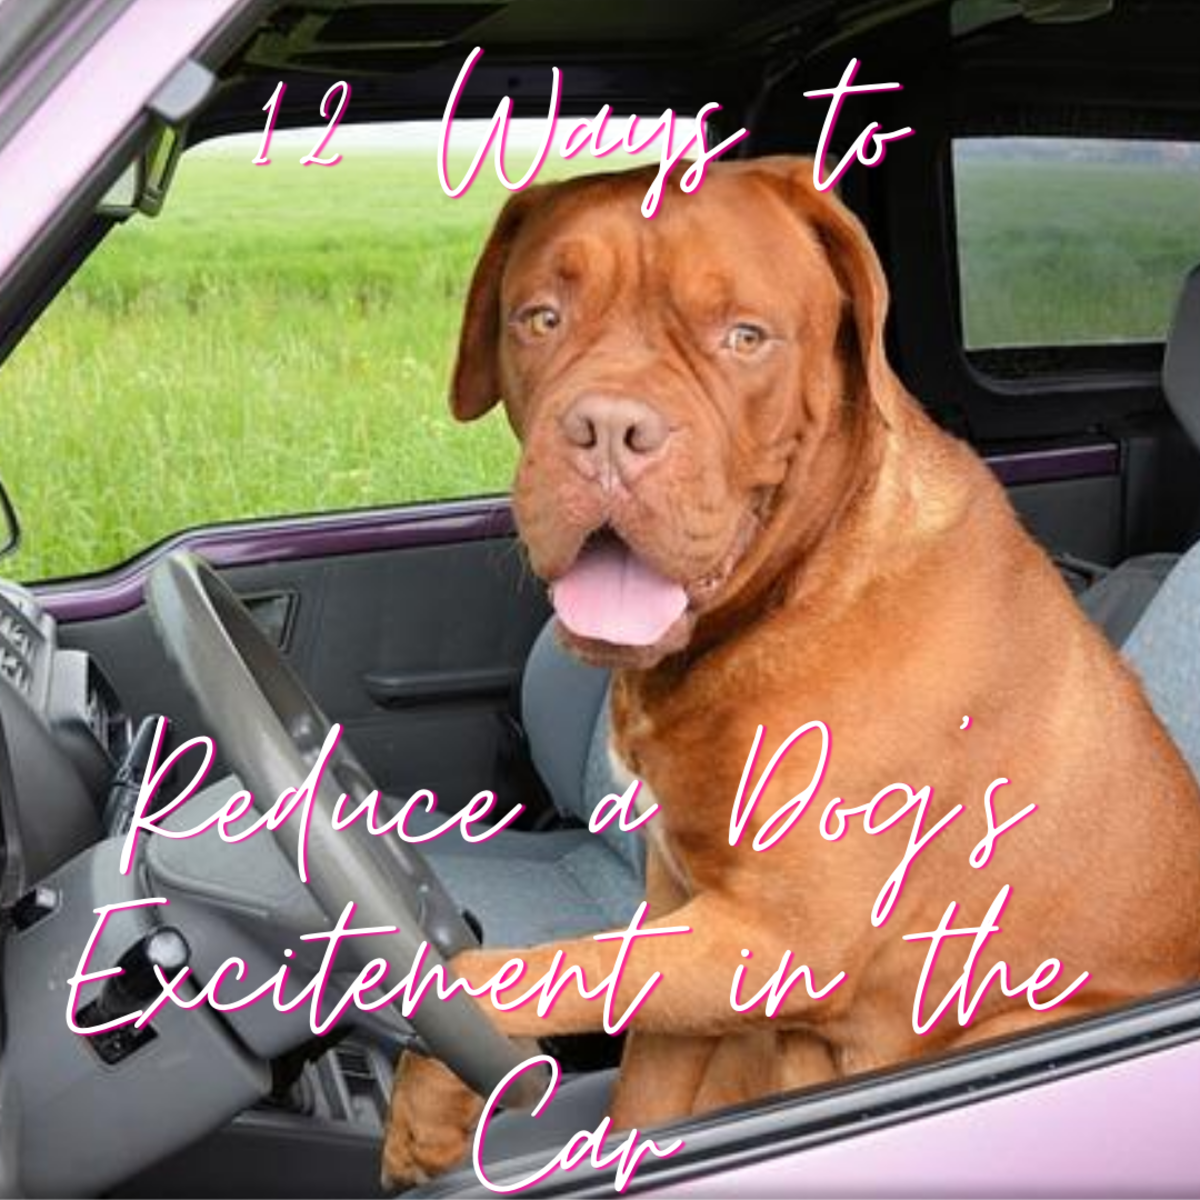 Many dogs are too excited in the car, and dog owners may wonder about how to calm down these fellows. Short of giving your dog some soothing chamomile tea, what is left? Fortunately, there are many strategies to help your dog out.